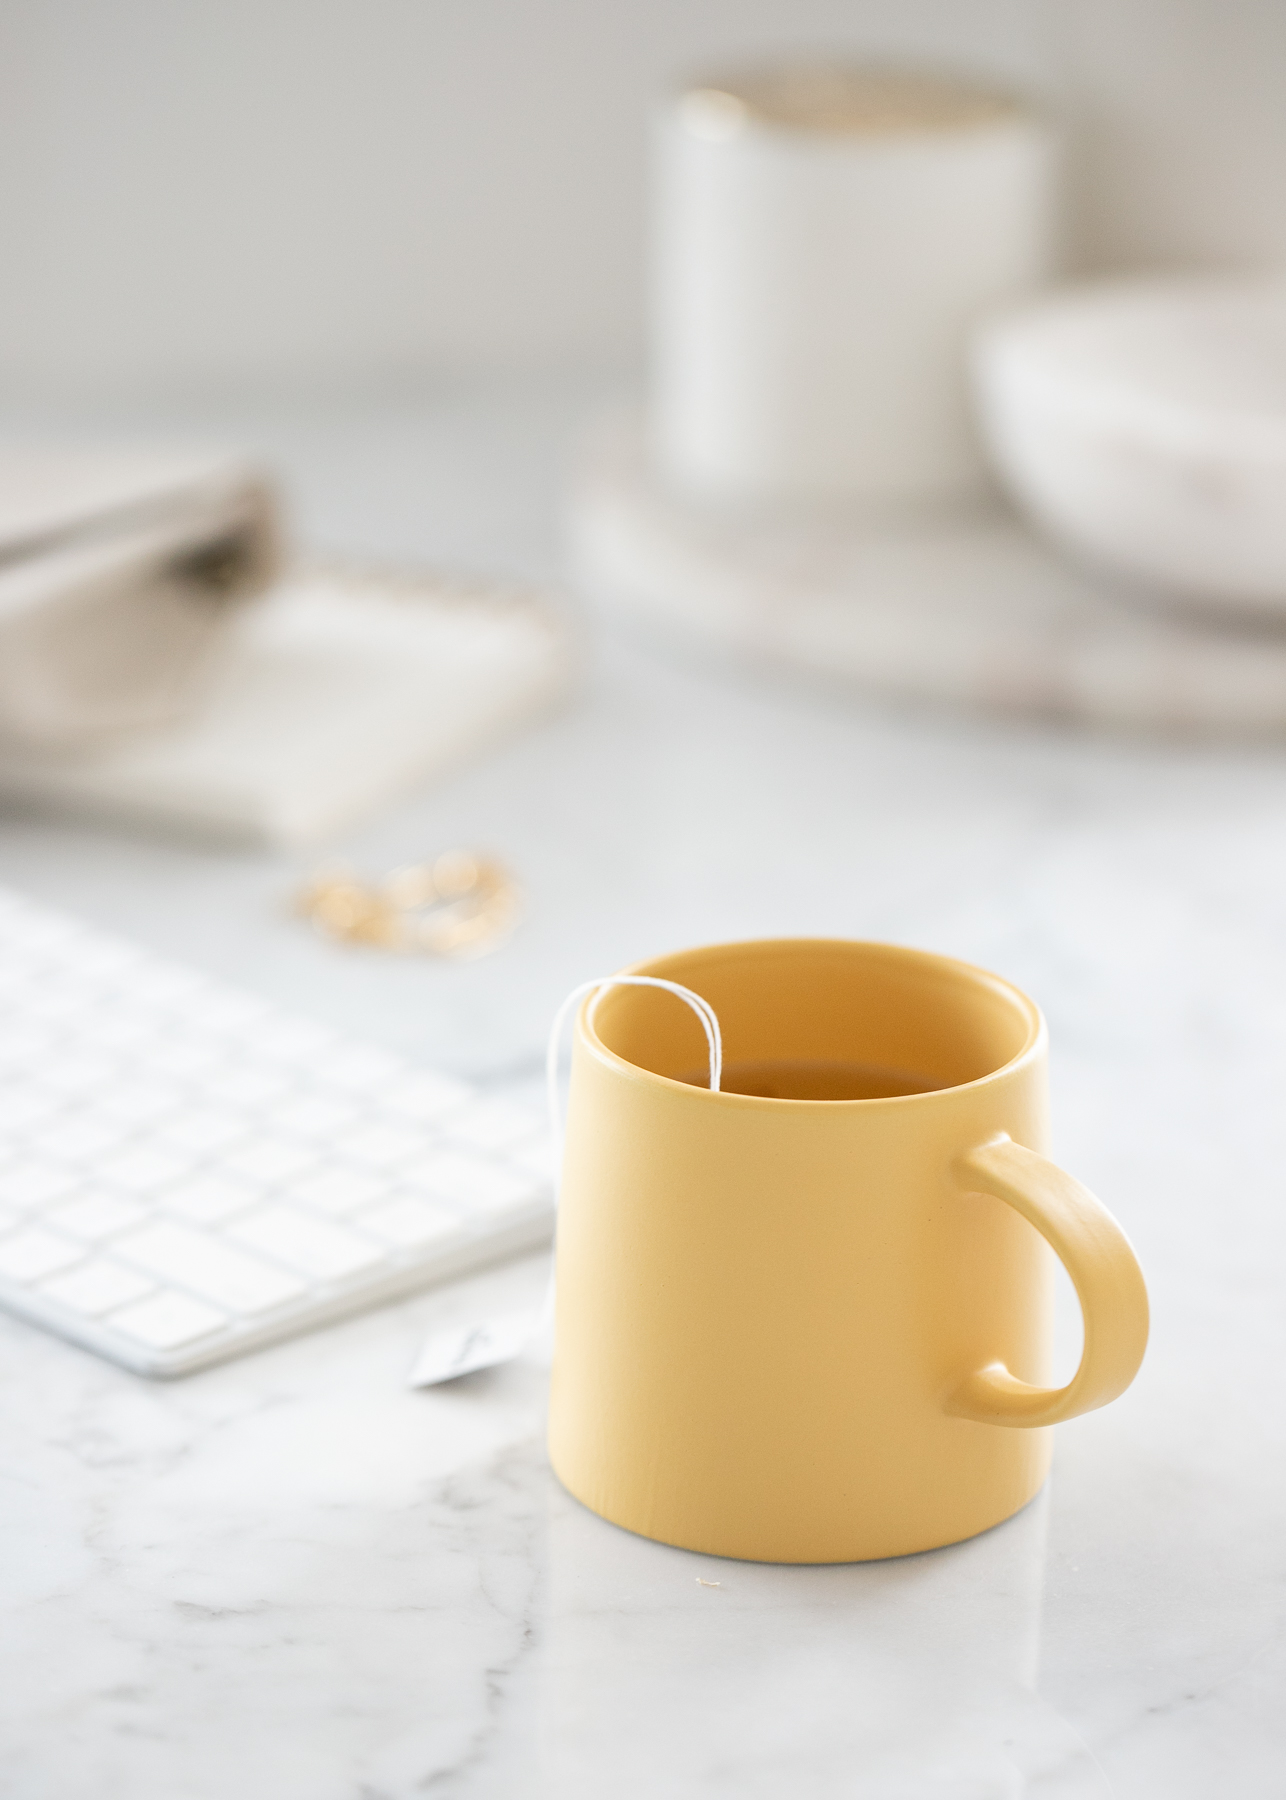 Image of a yellow coffee cup sitting on a counter with a keyboard in the background.